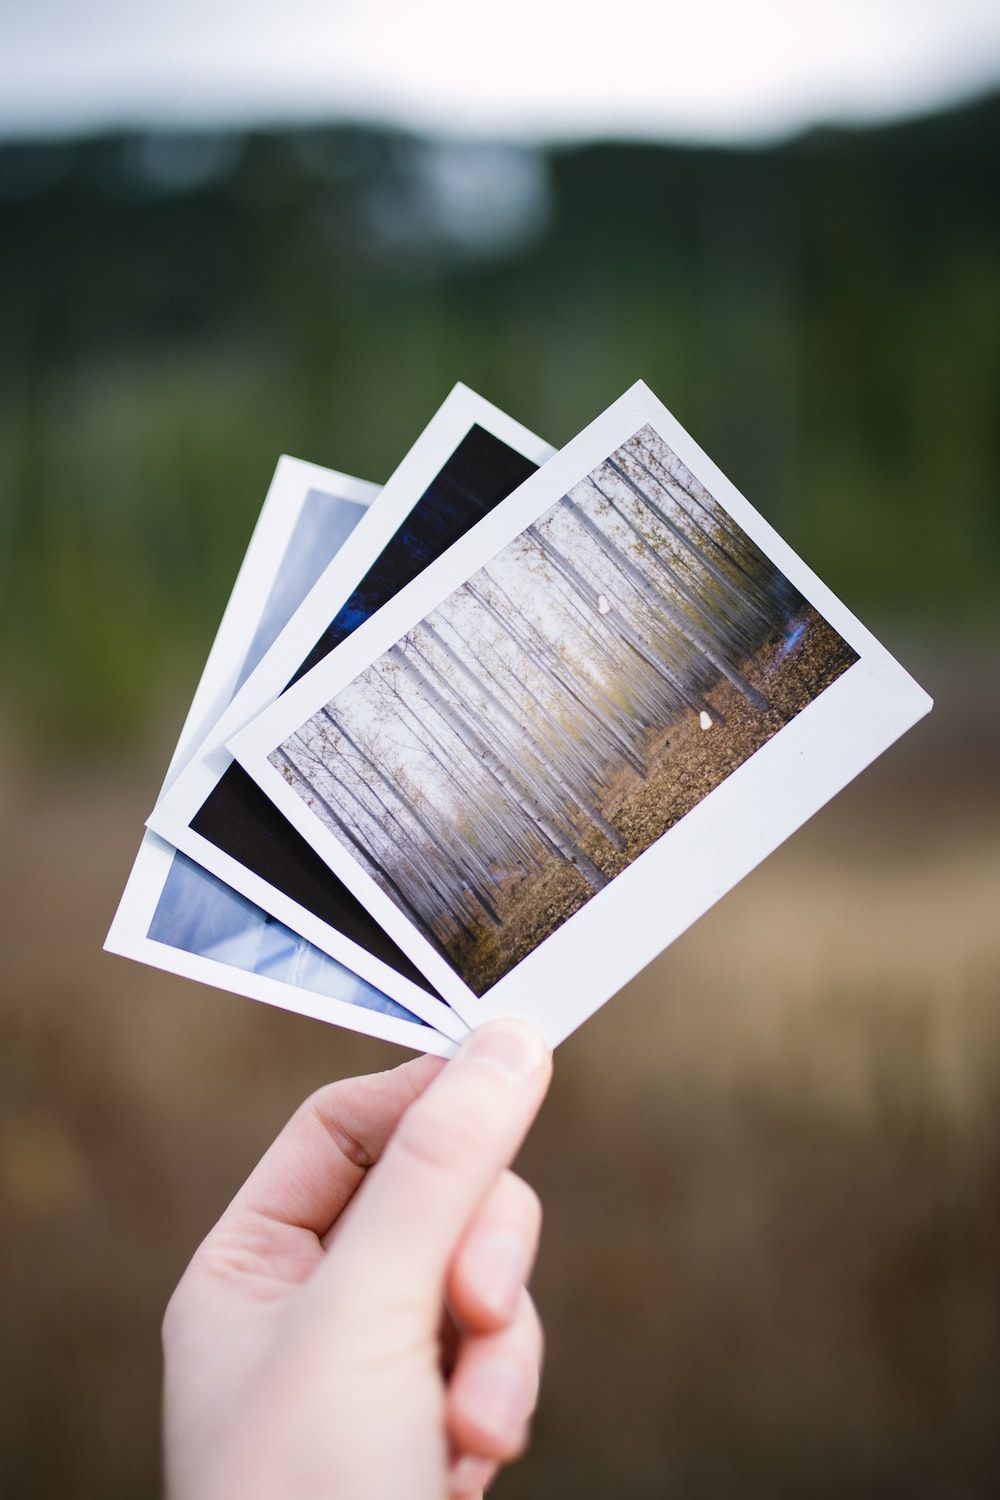 Person holding polaroid photos of trees in a forest - Polaroid